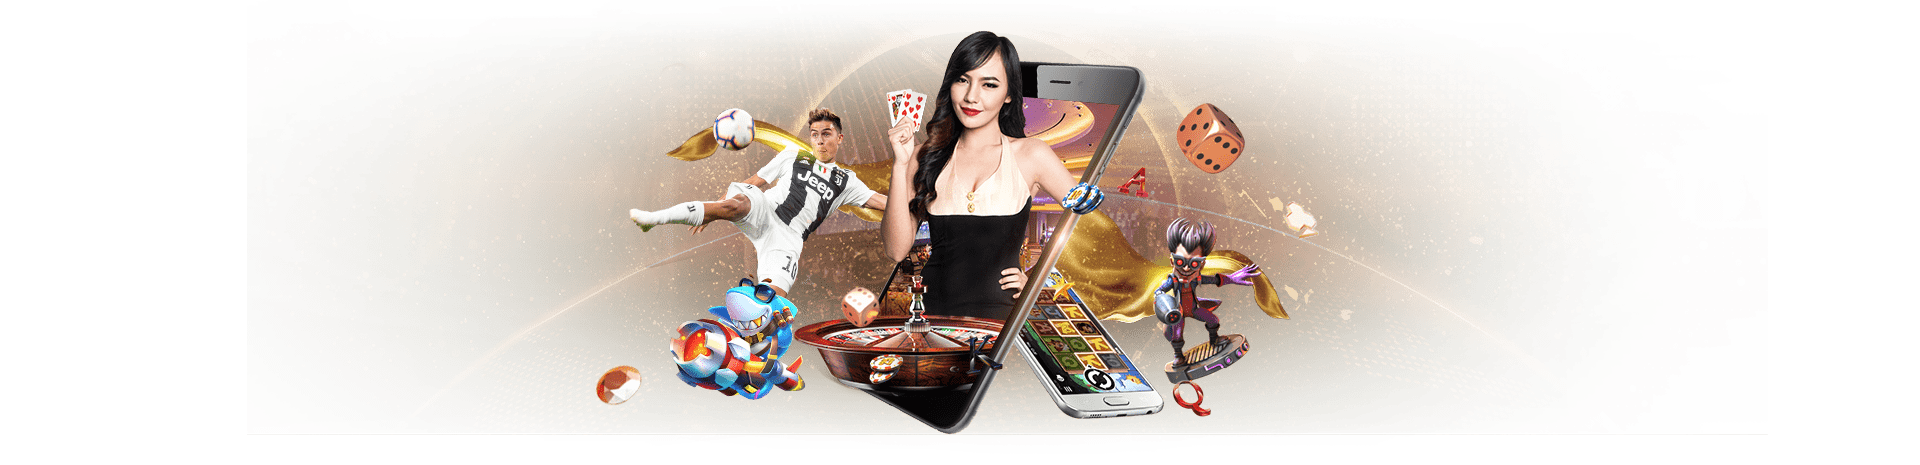 Download ON88 Online Casino Malaysia